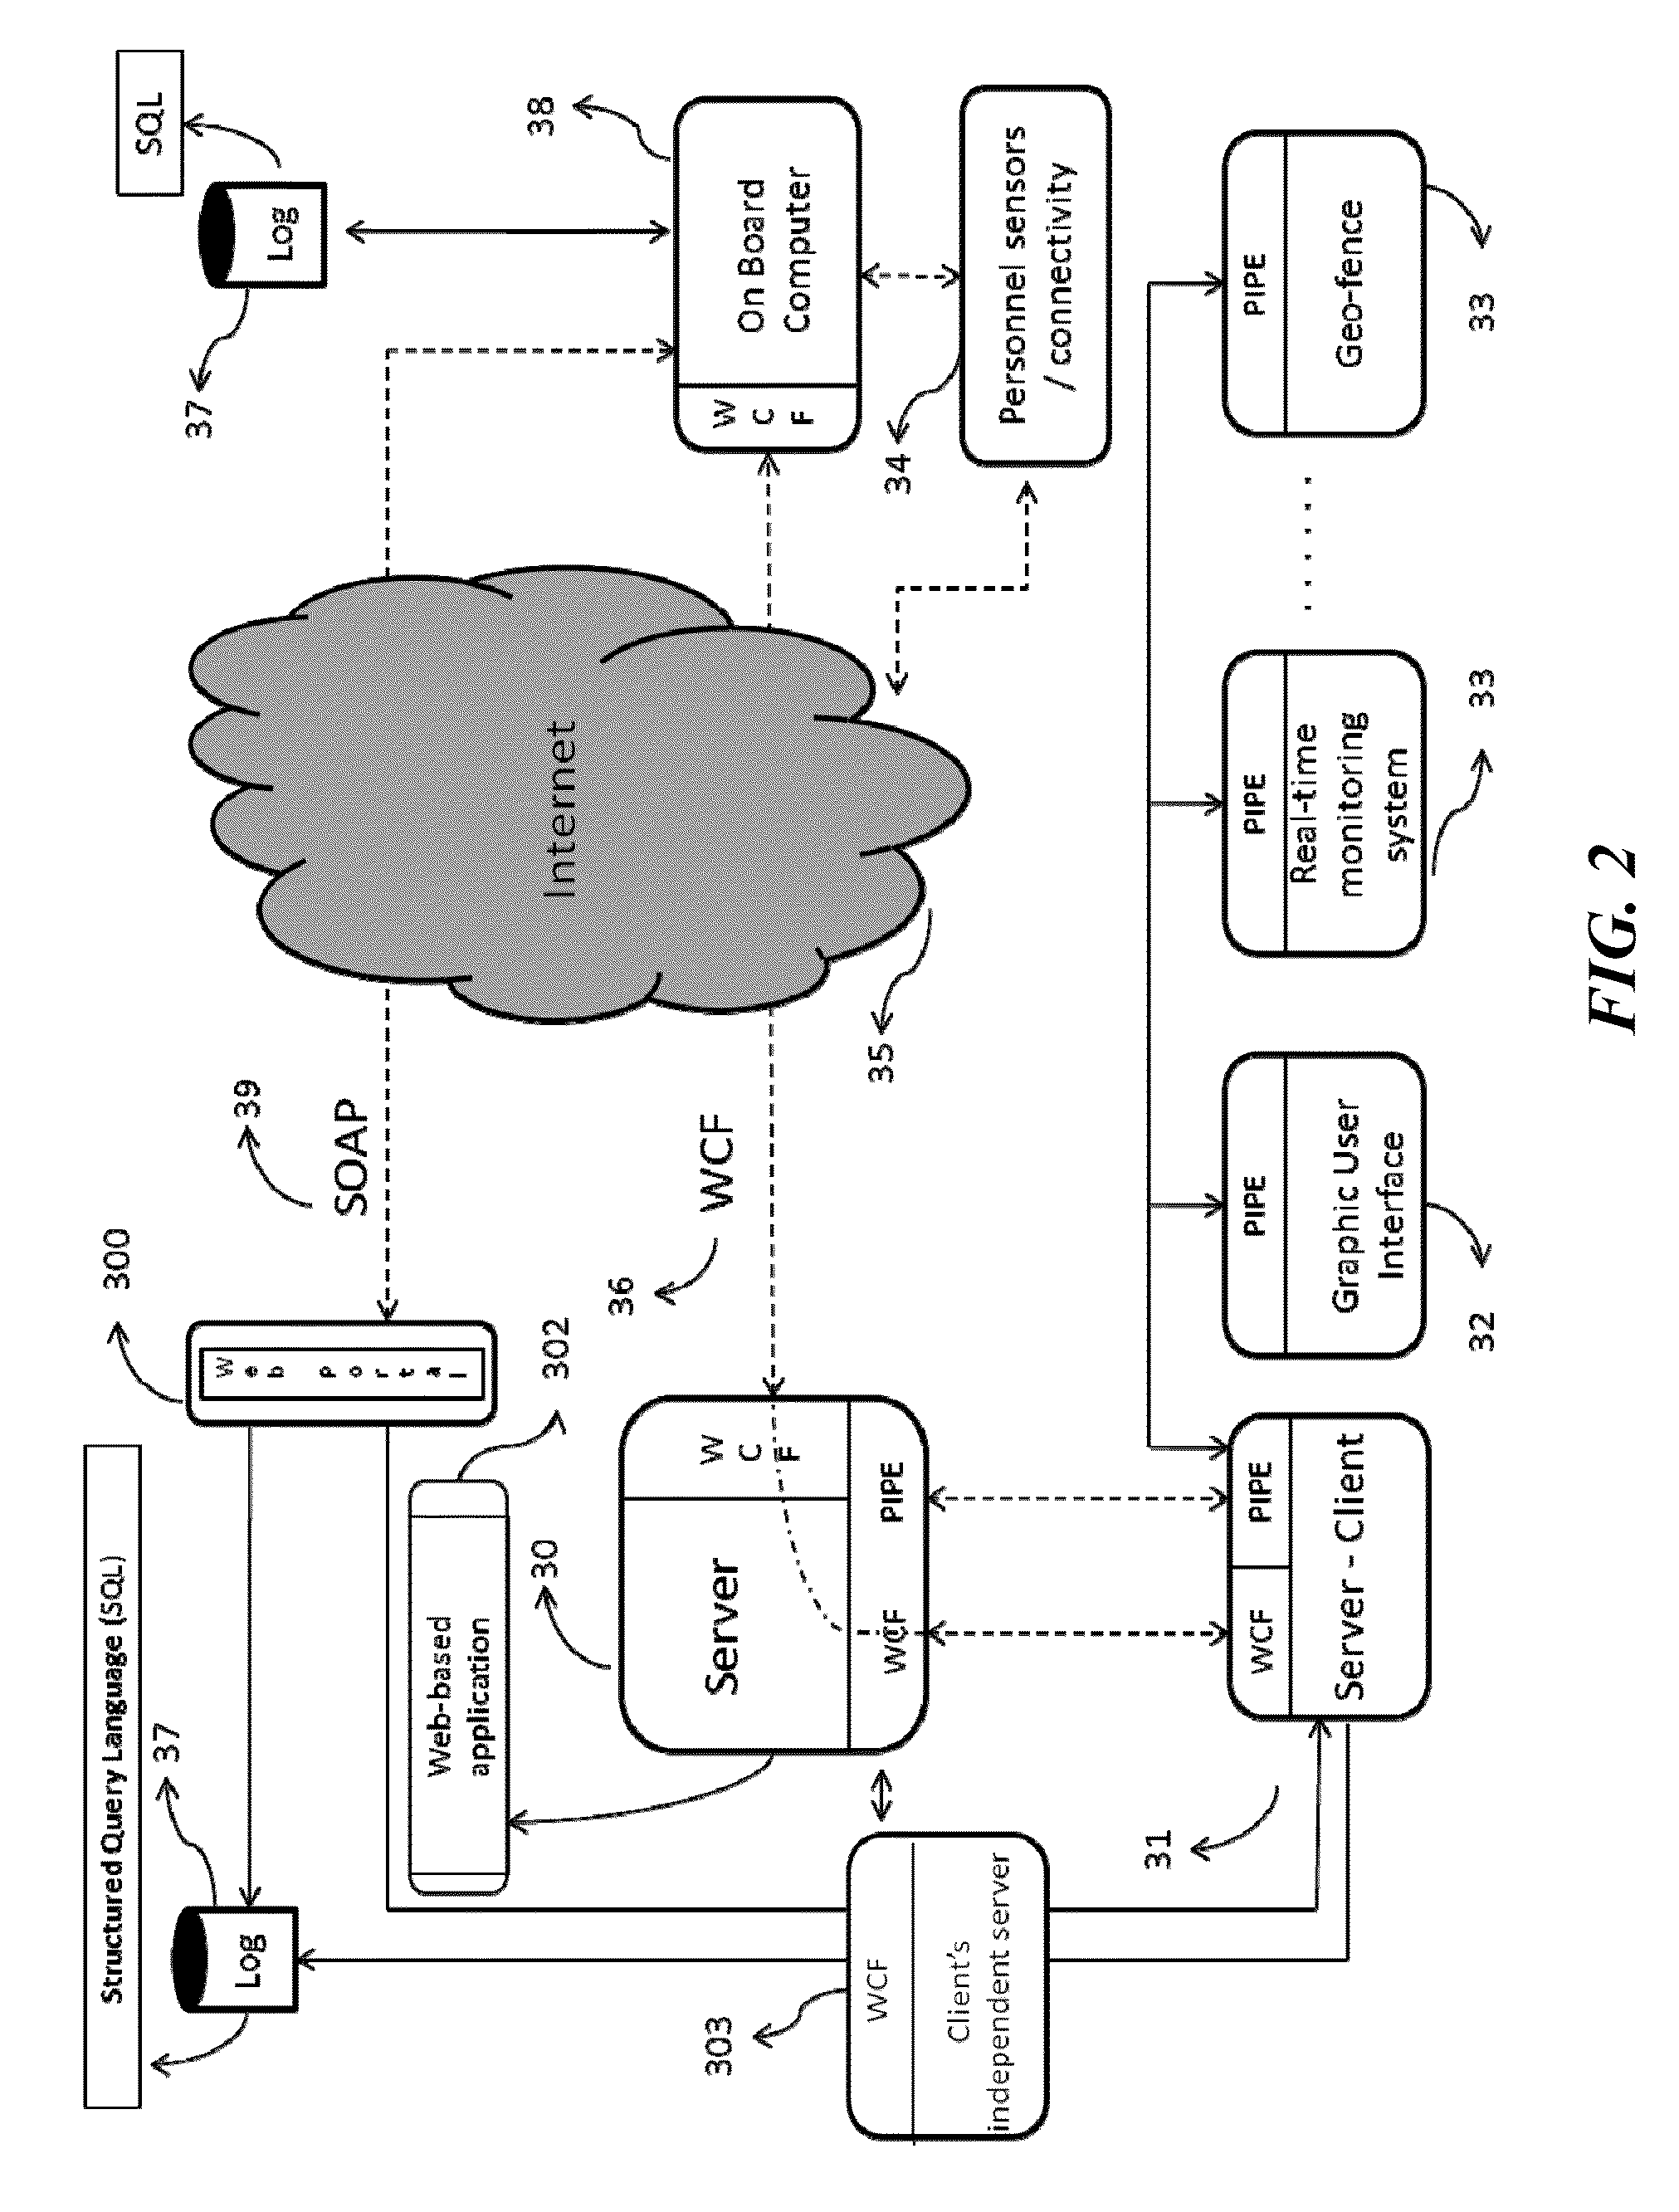 Apparatus, method, and platform for real-time mobile broadband communication data